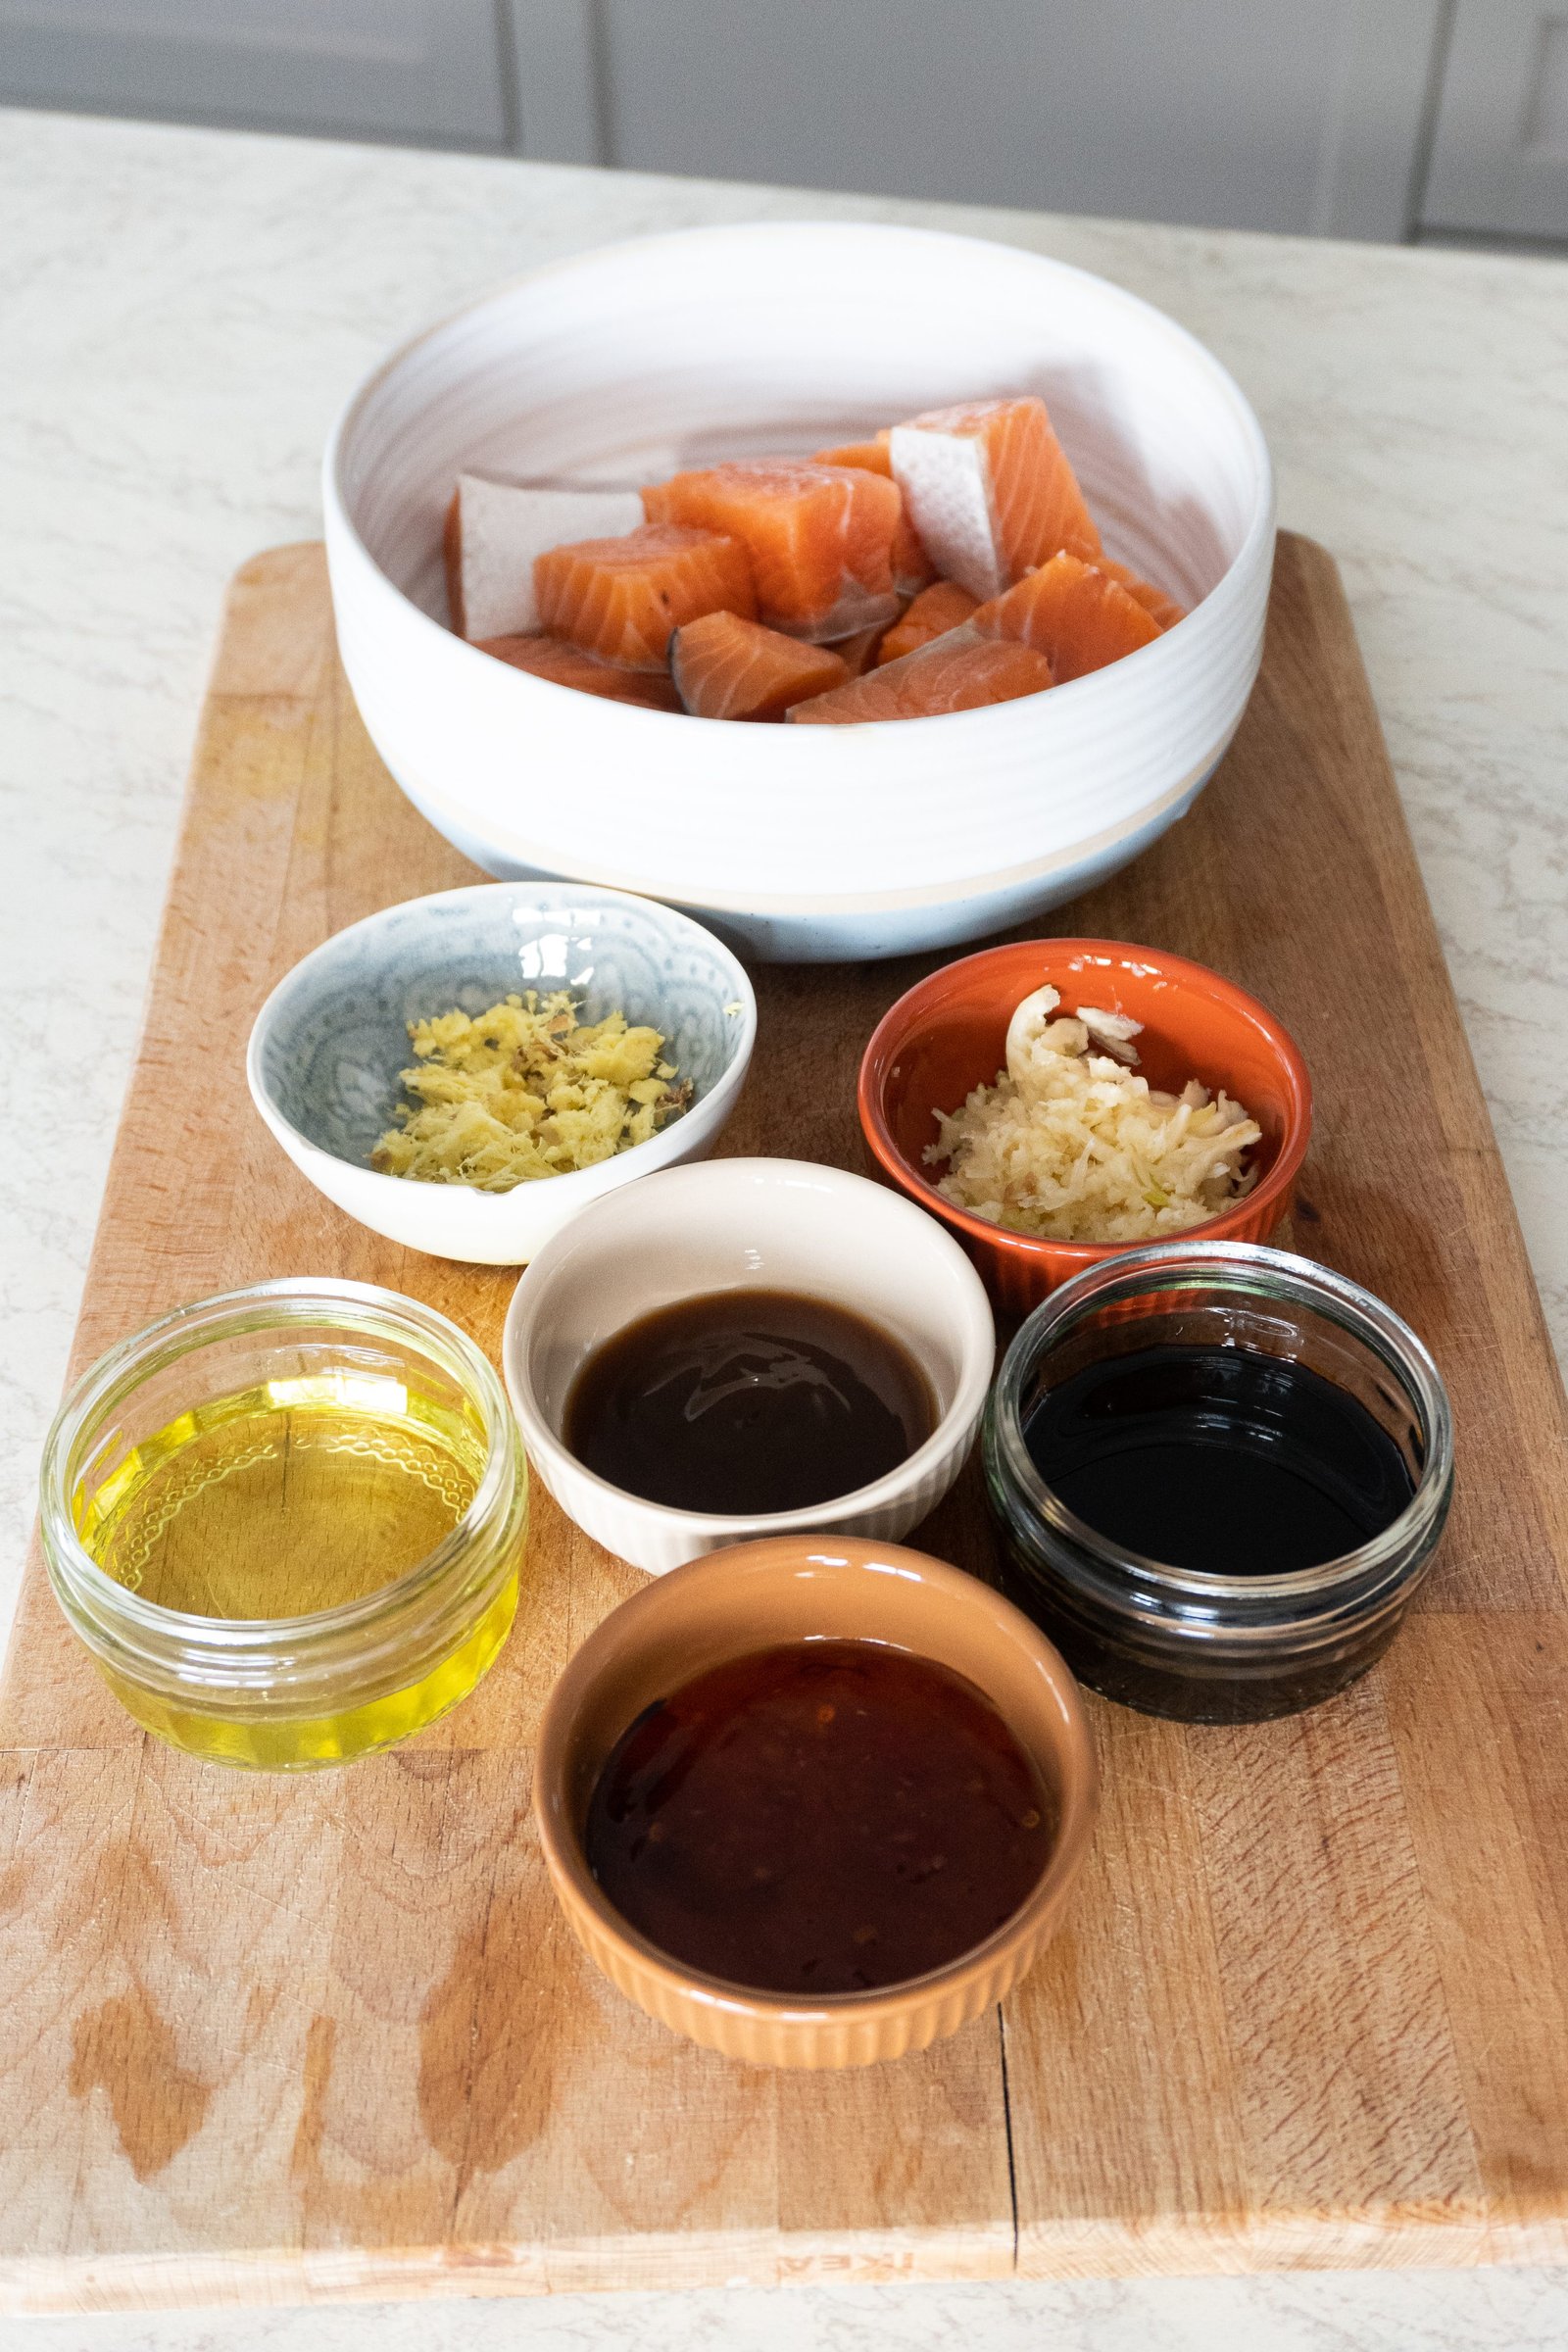 An image featuring the ingredients for a Crispy Honey Ginger Garlic Salmon Bowl. The photo shows a wooden cutting board with a selection of fresh ingredients, including salmon fillets, avocado, green onions, sesame oil, honey, soy sauce, oyster sauce, oil ginger and garlic.